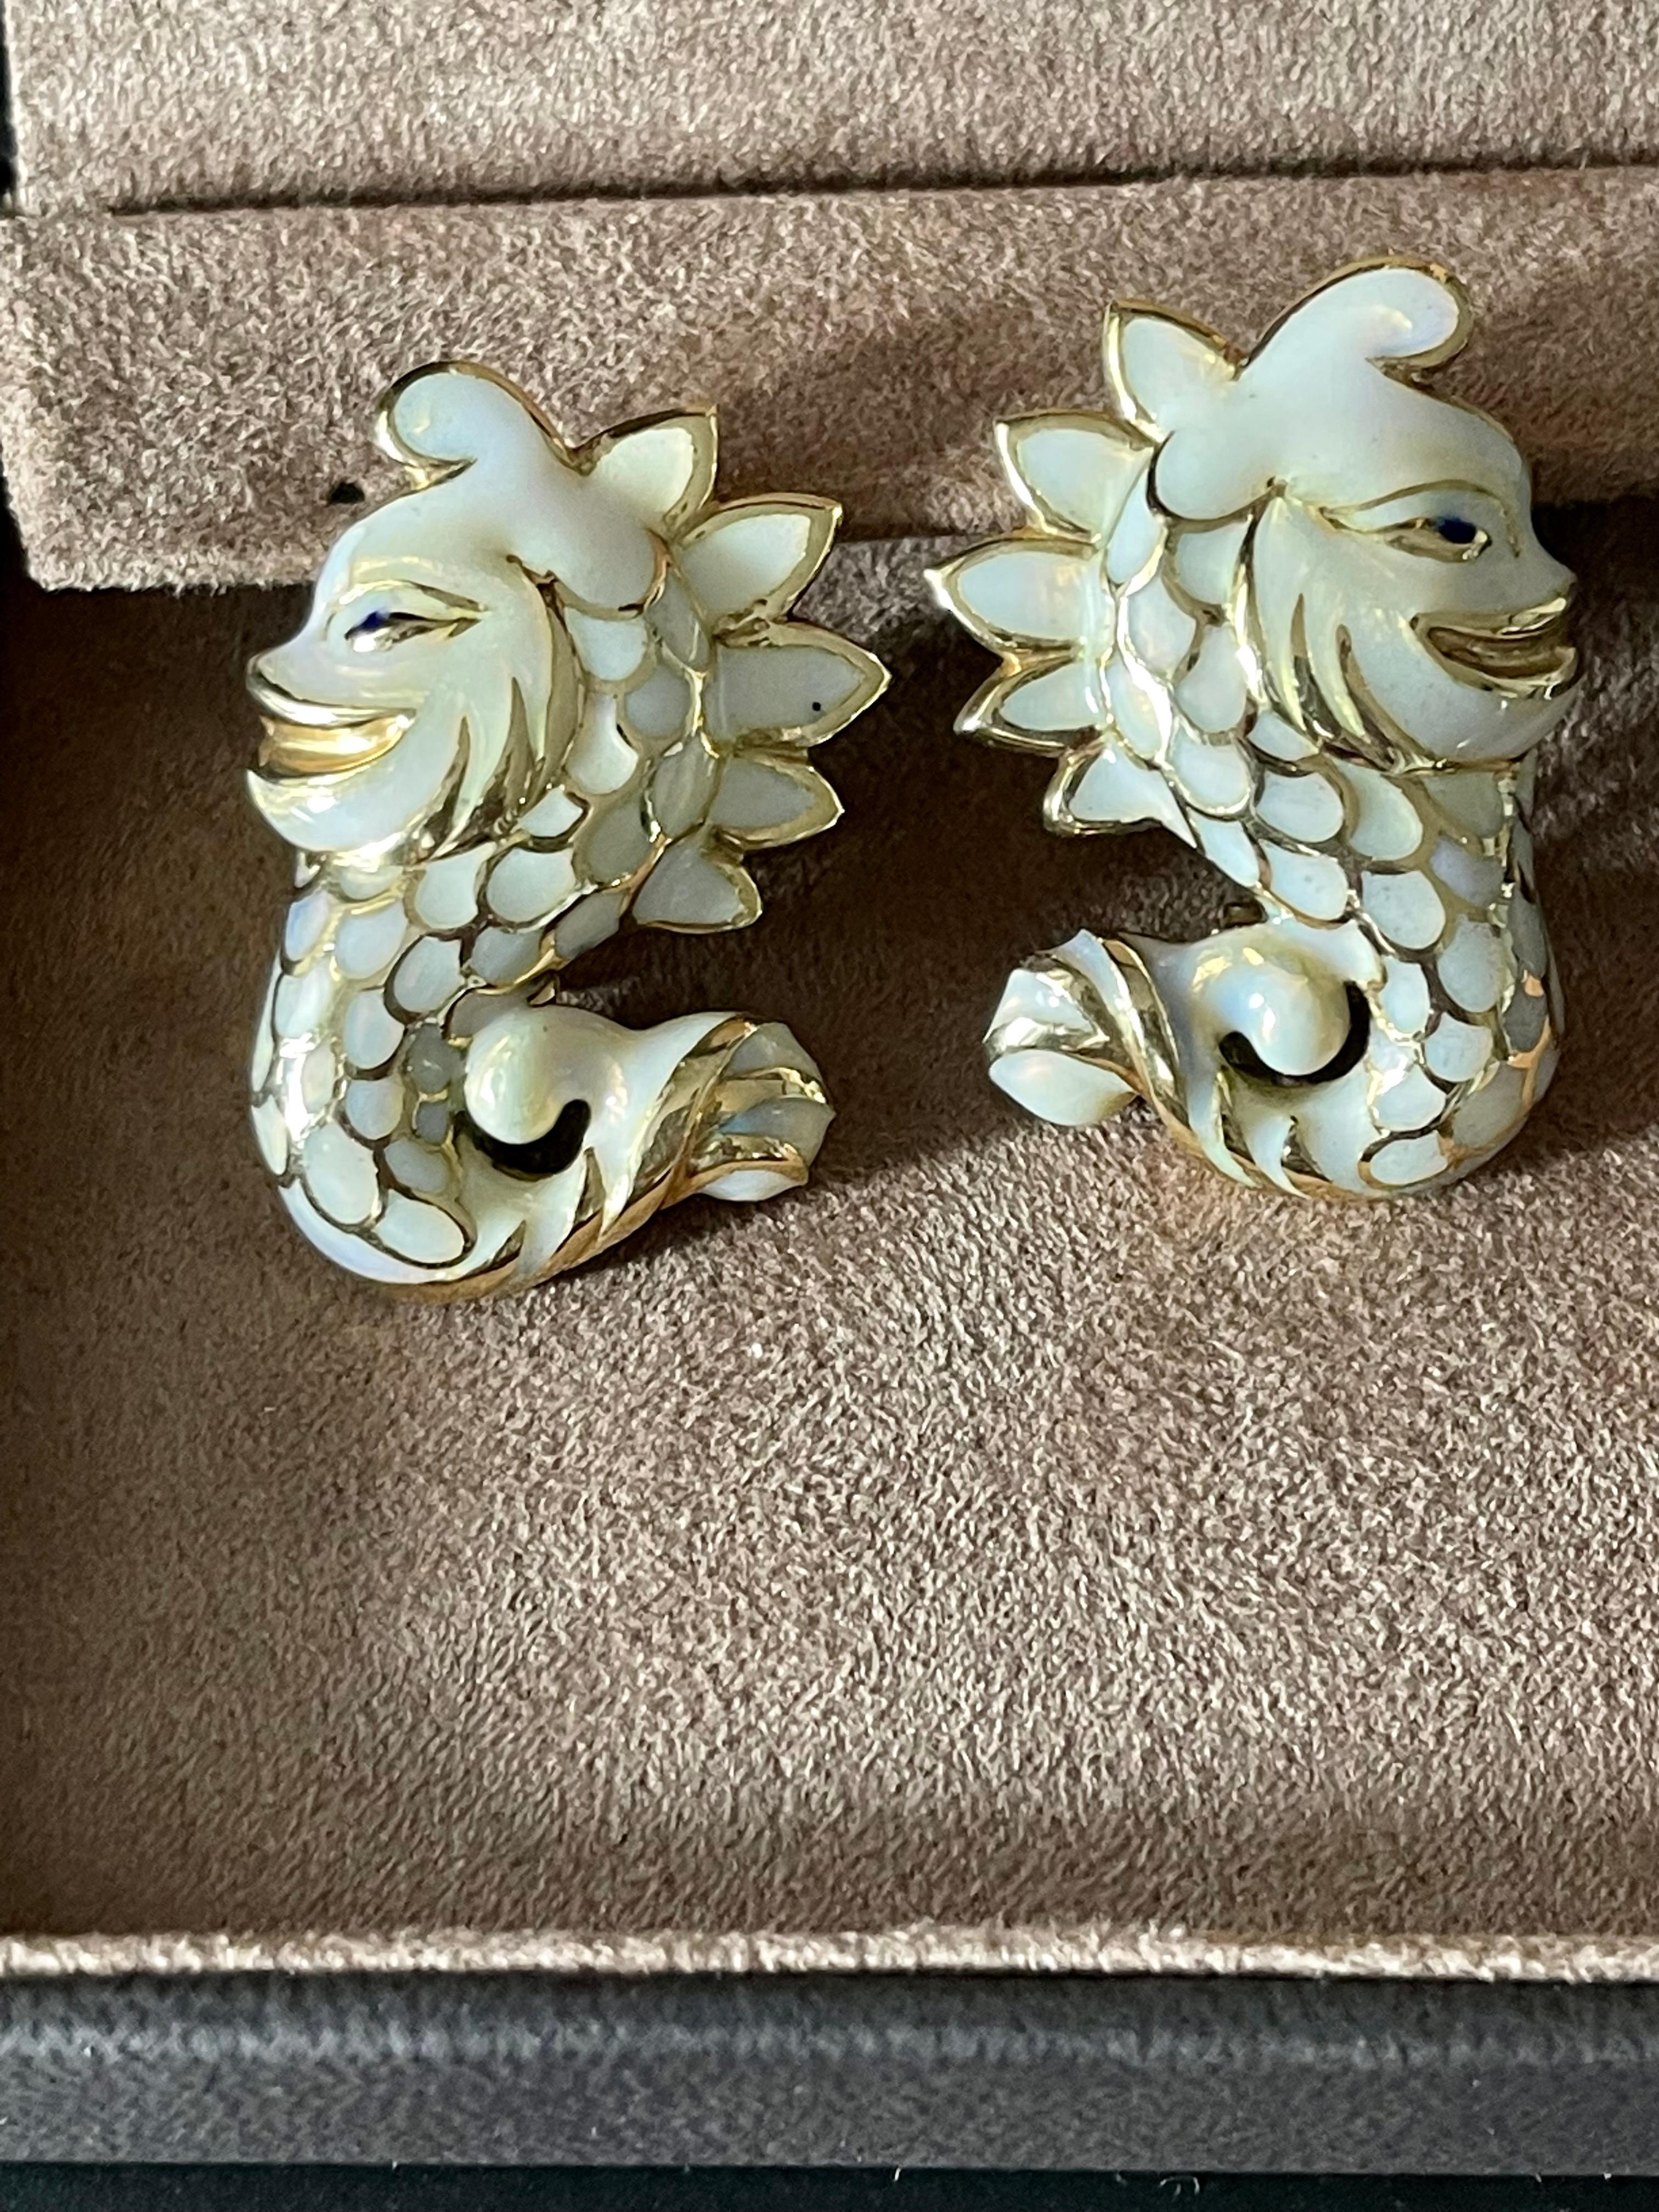 Finely detailed pair of playful seahorse earrings, crafted in 14 K yellow Gold covered with nice ivory colored Enamel.
Masterfully handcrafted piece! Authenticity and money back is guaranteed.
Dimensions: 3.7 cm x 2.6 cm. Solid 14 K yellow Gold.